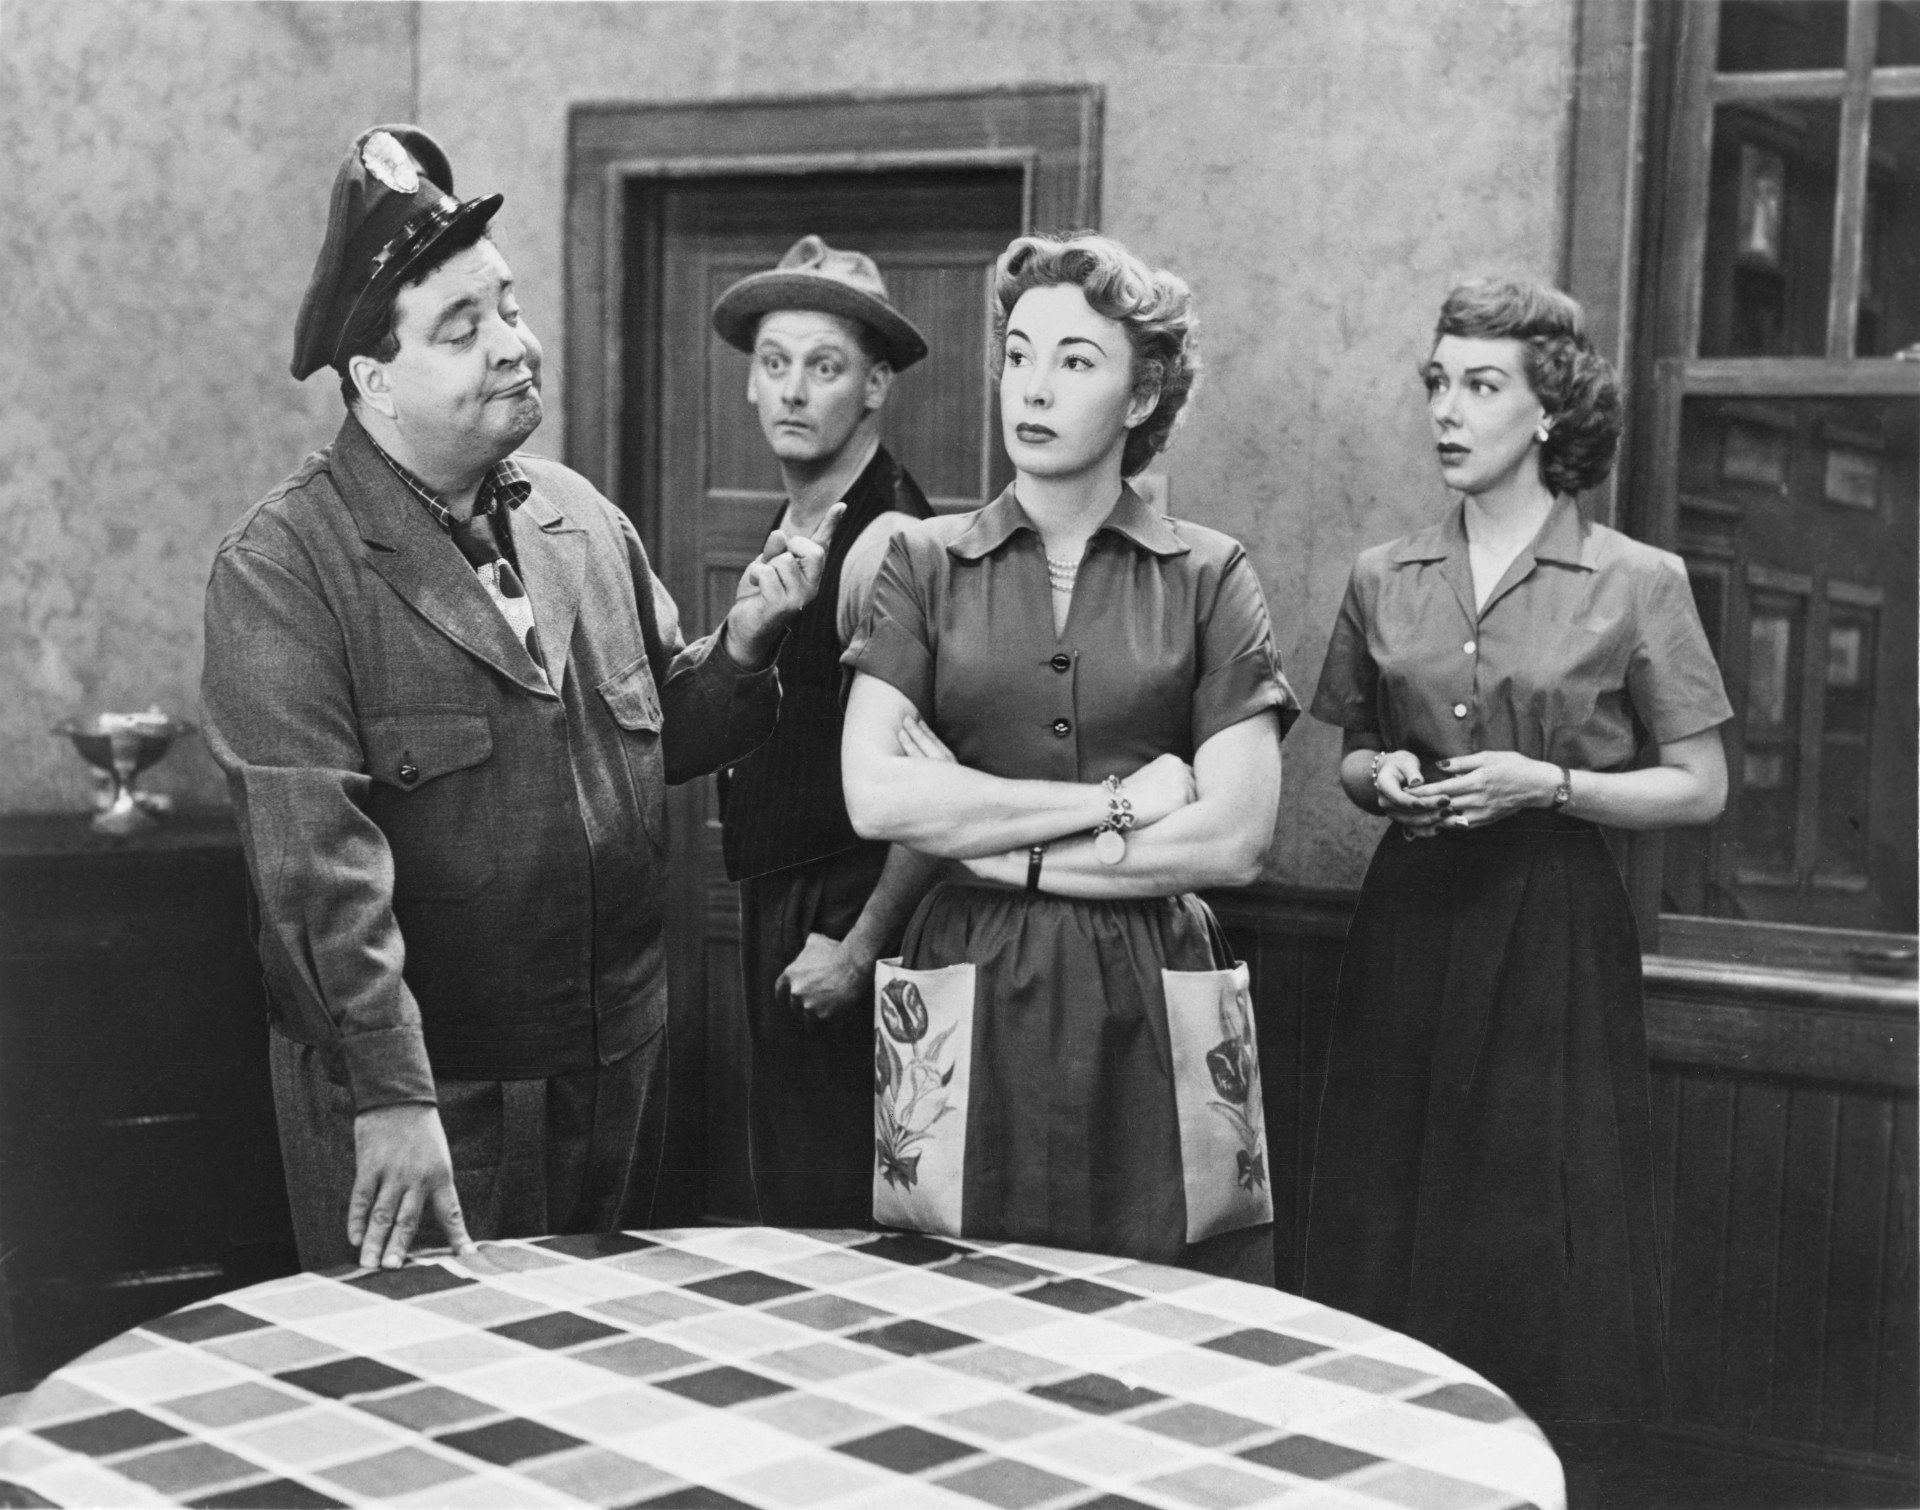 Jackie Gleason poses with the cast of 'The Honeymooners' in the kitchen. 